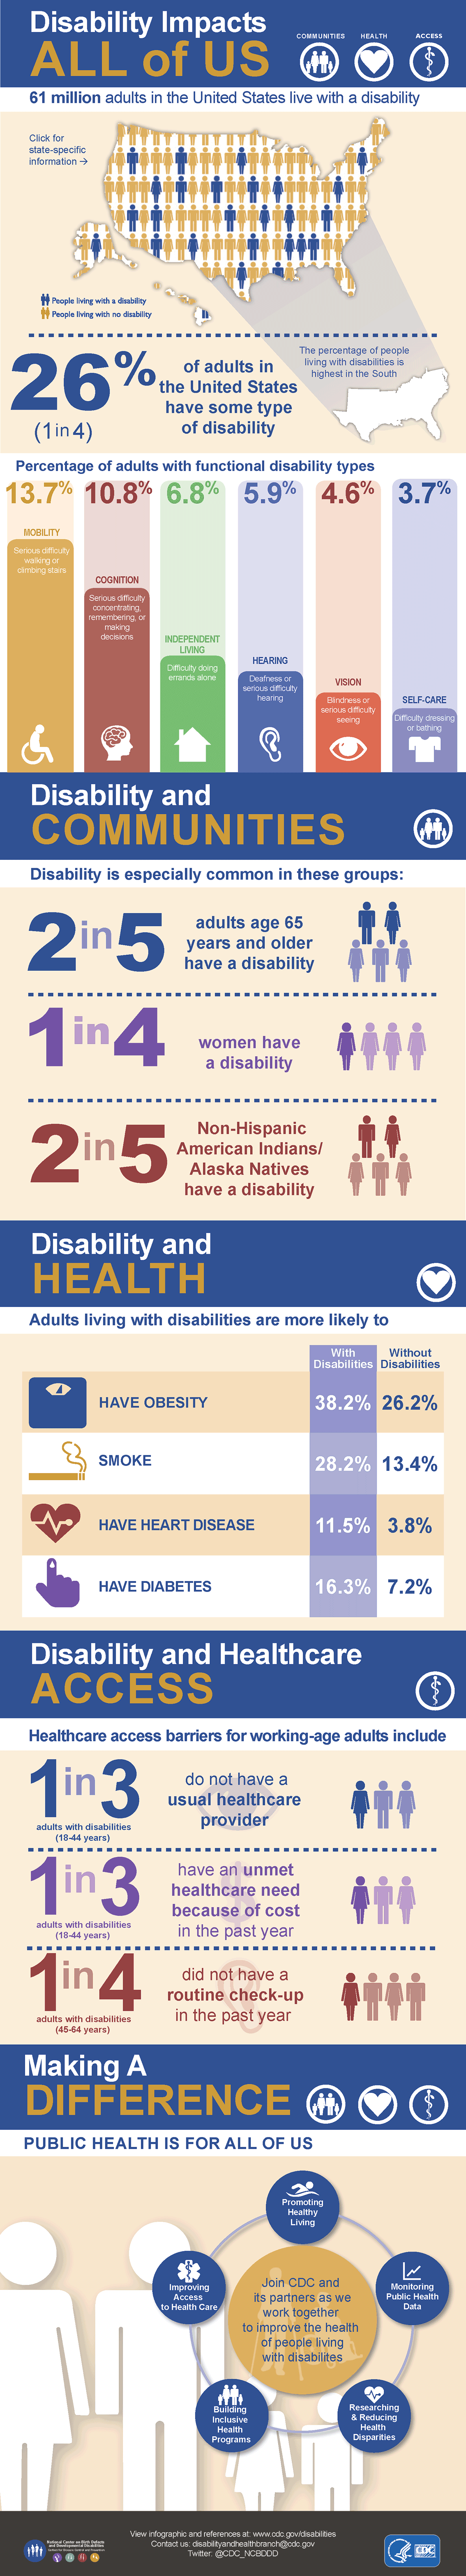 Disability Impacts All of Us infographic, see details below